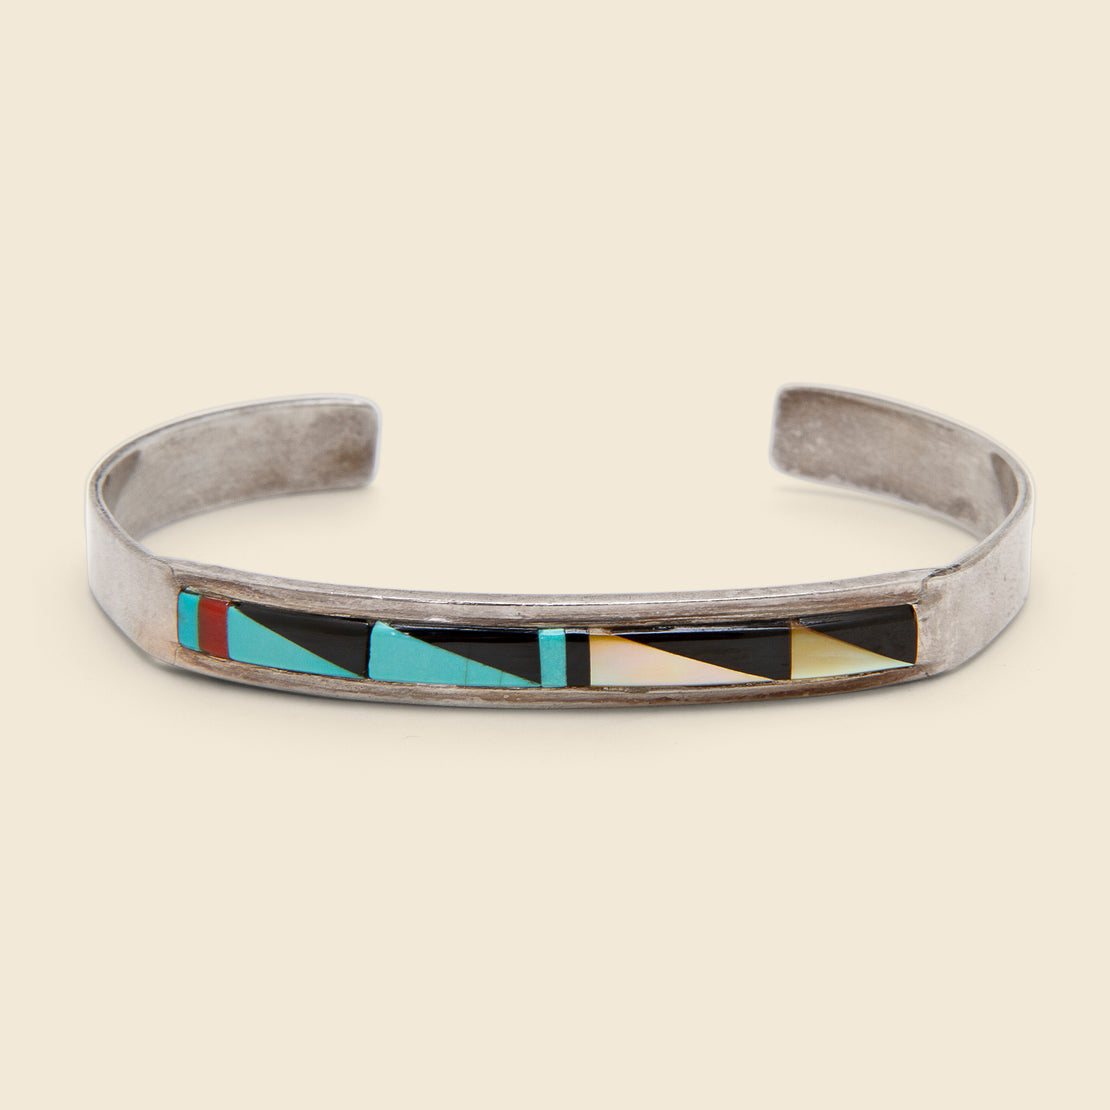 Vintage Zuni Inlay Cuff - Sterling/Turquoise/Onyx/Mother of Pearl